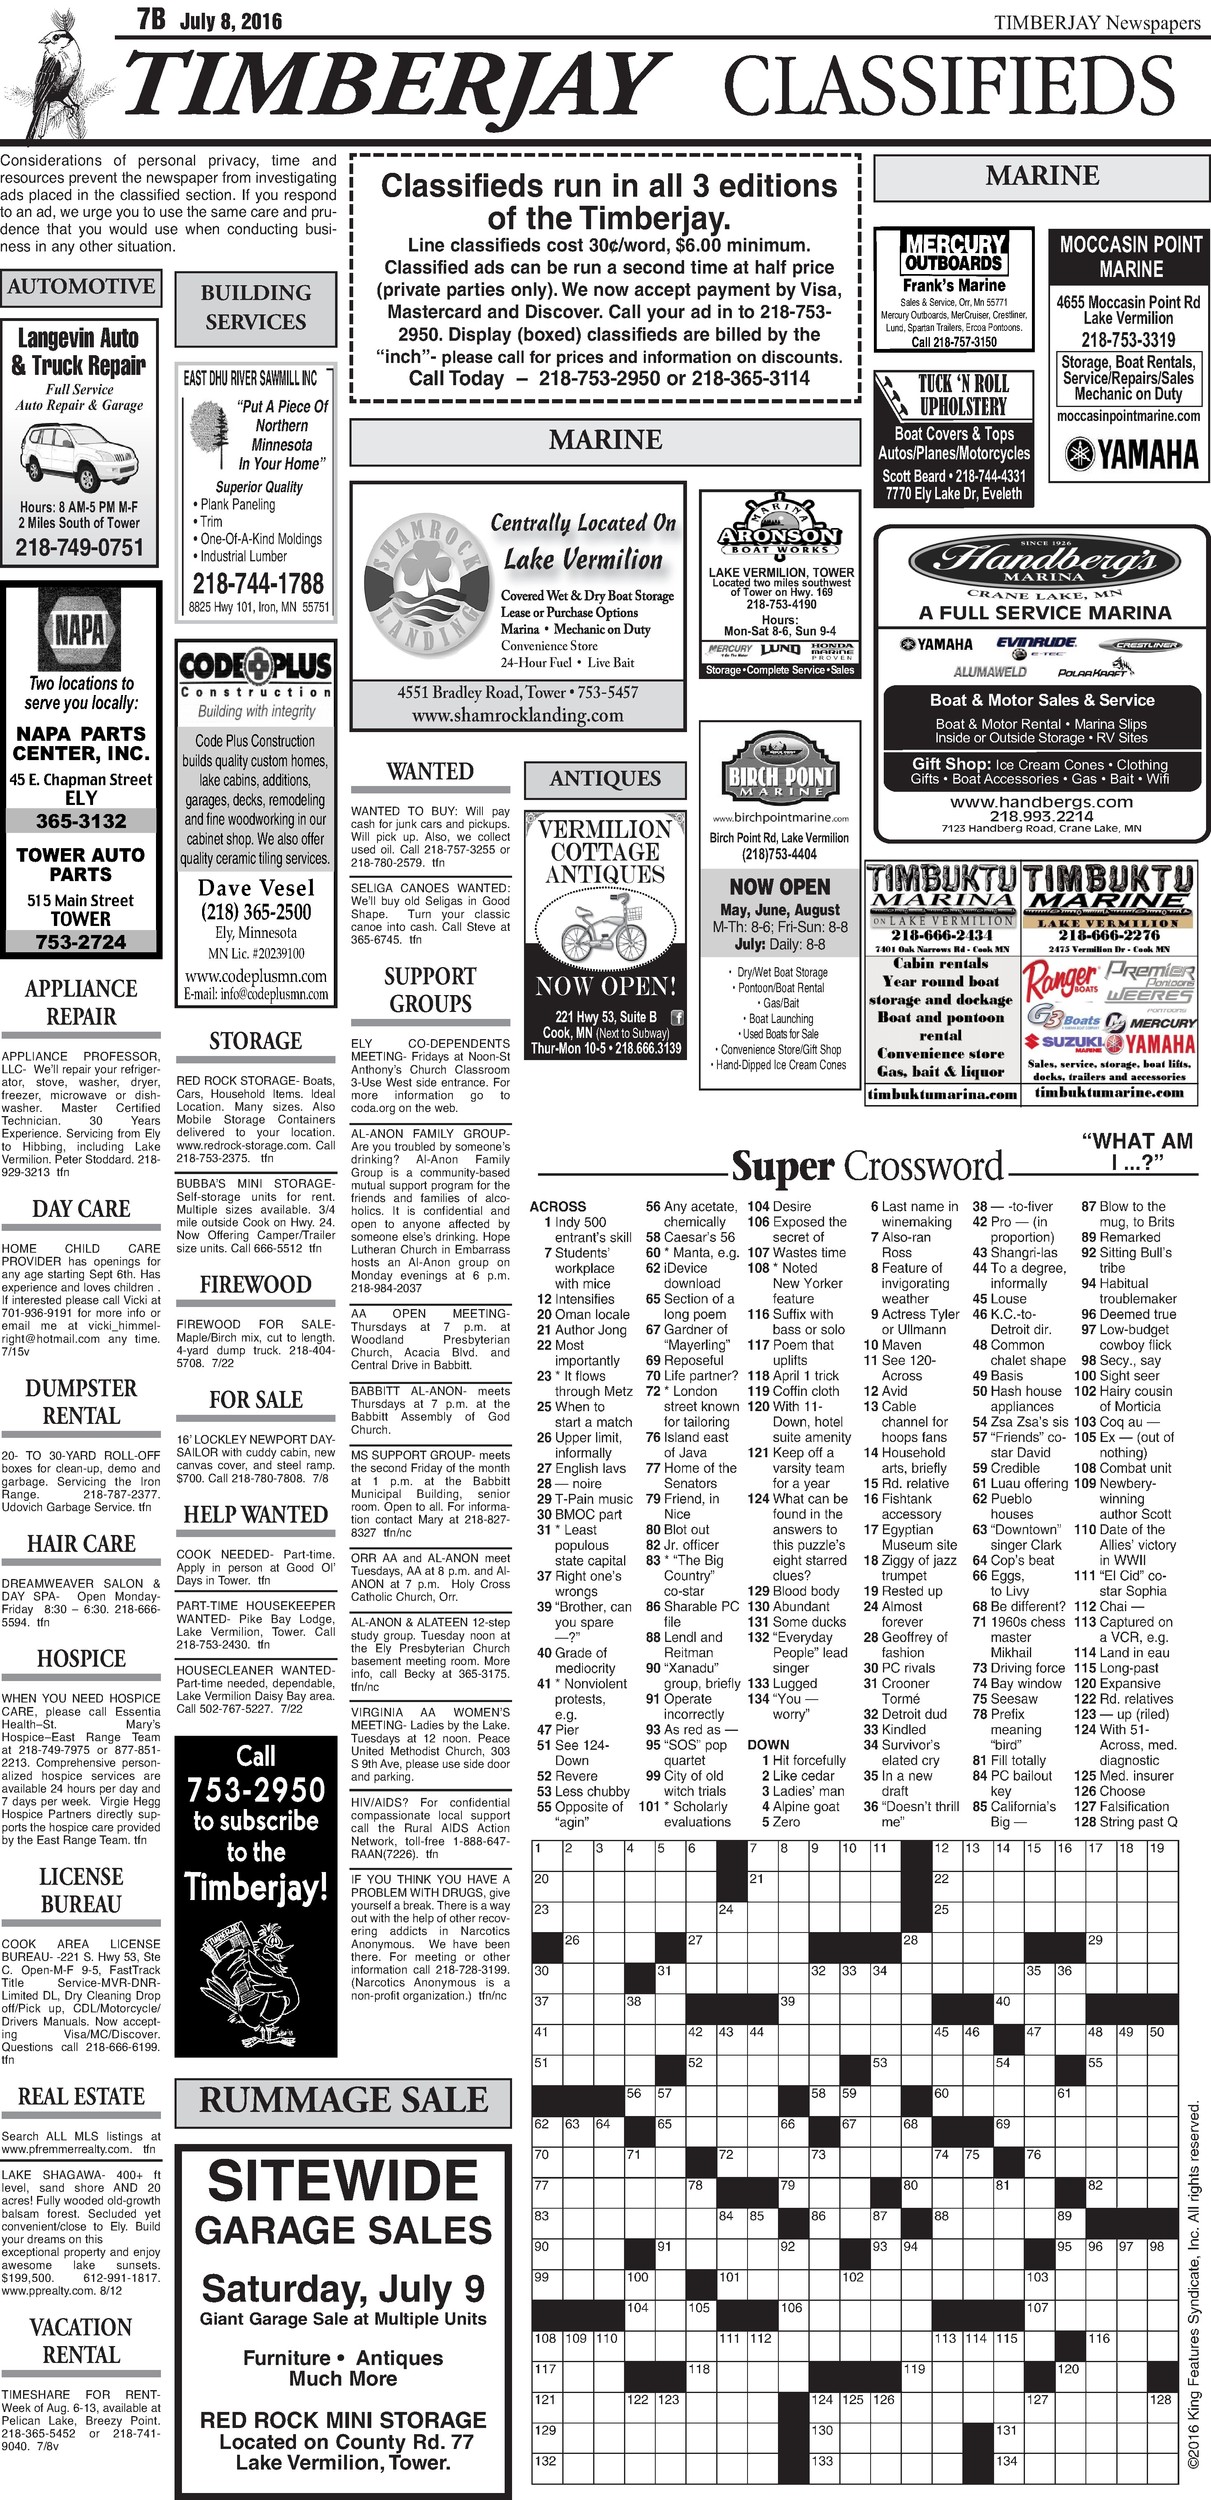 Click here to download the legal notices and classifieds from page 7B